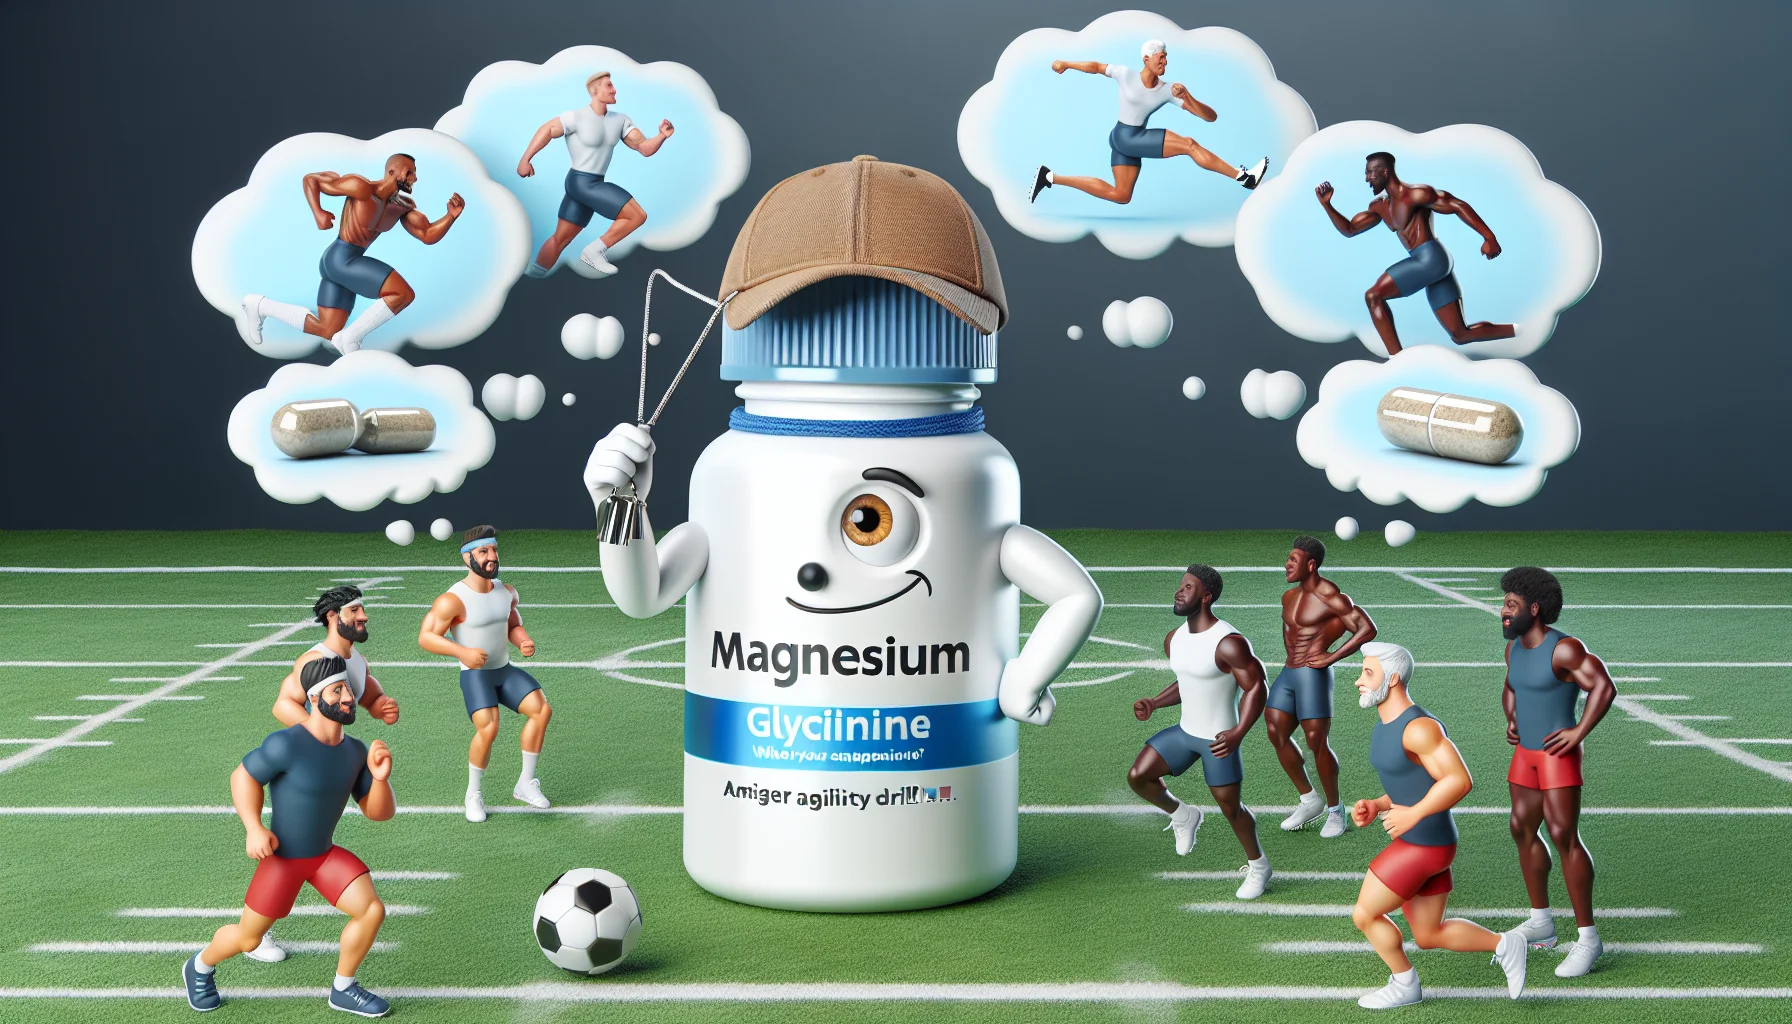 A humorous, realistic scene centered around a personified magnesium glycinate supplement. The supplement, displayed with a friendly and inviting expression, is playing the role of a football coach, showcasing agility drills. It holds a whistle and wears a cap. This fun-loving supplement is encouraging a group of diverse athletes, of different genders and descents like Caucasian, Hispanic, South-Asian, etc., to take him up for enhancing their sports performance. This is communicated through thought bubbles containing images of strong, energetic athletes.